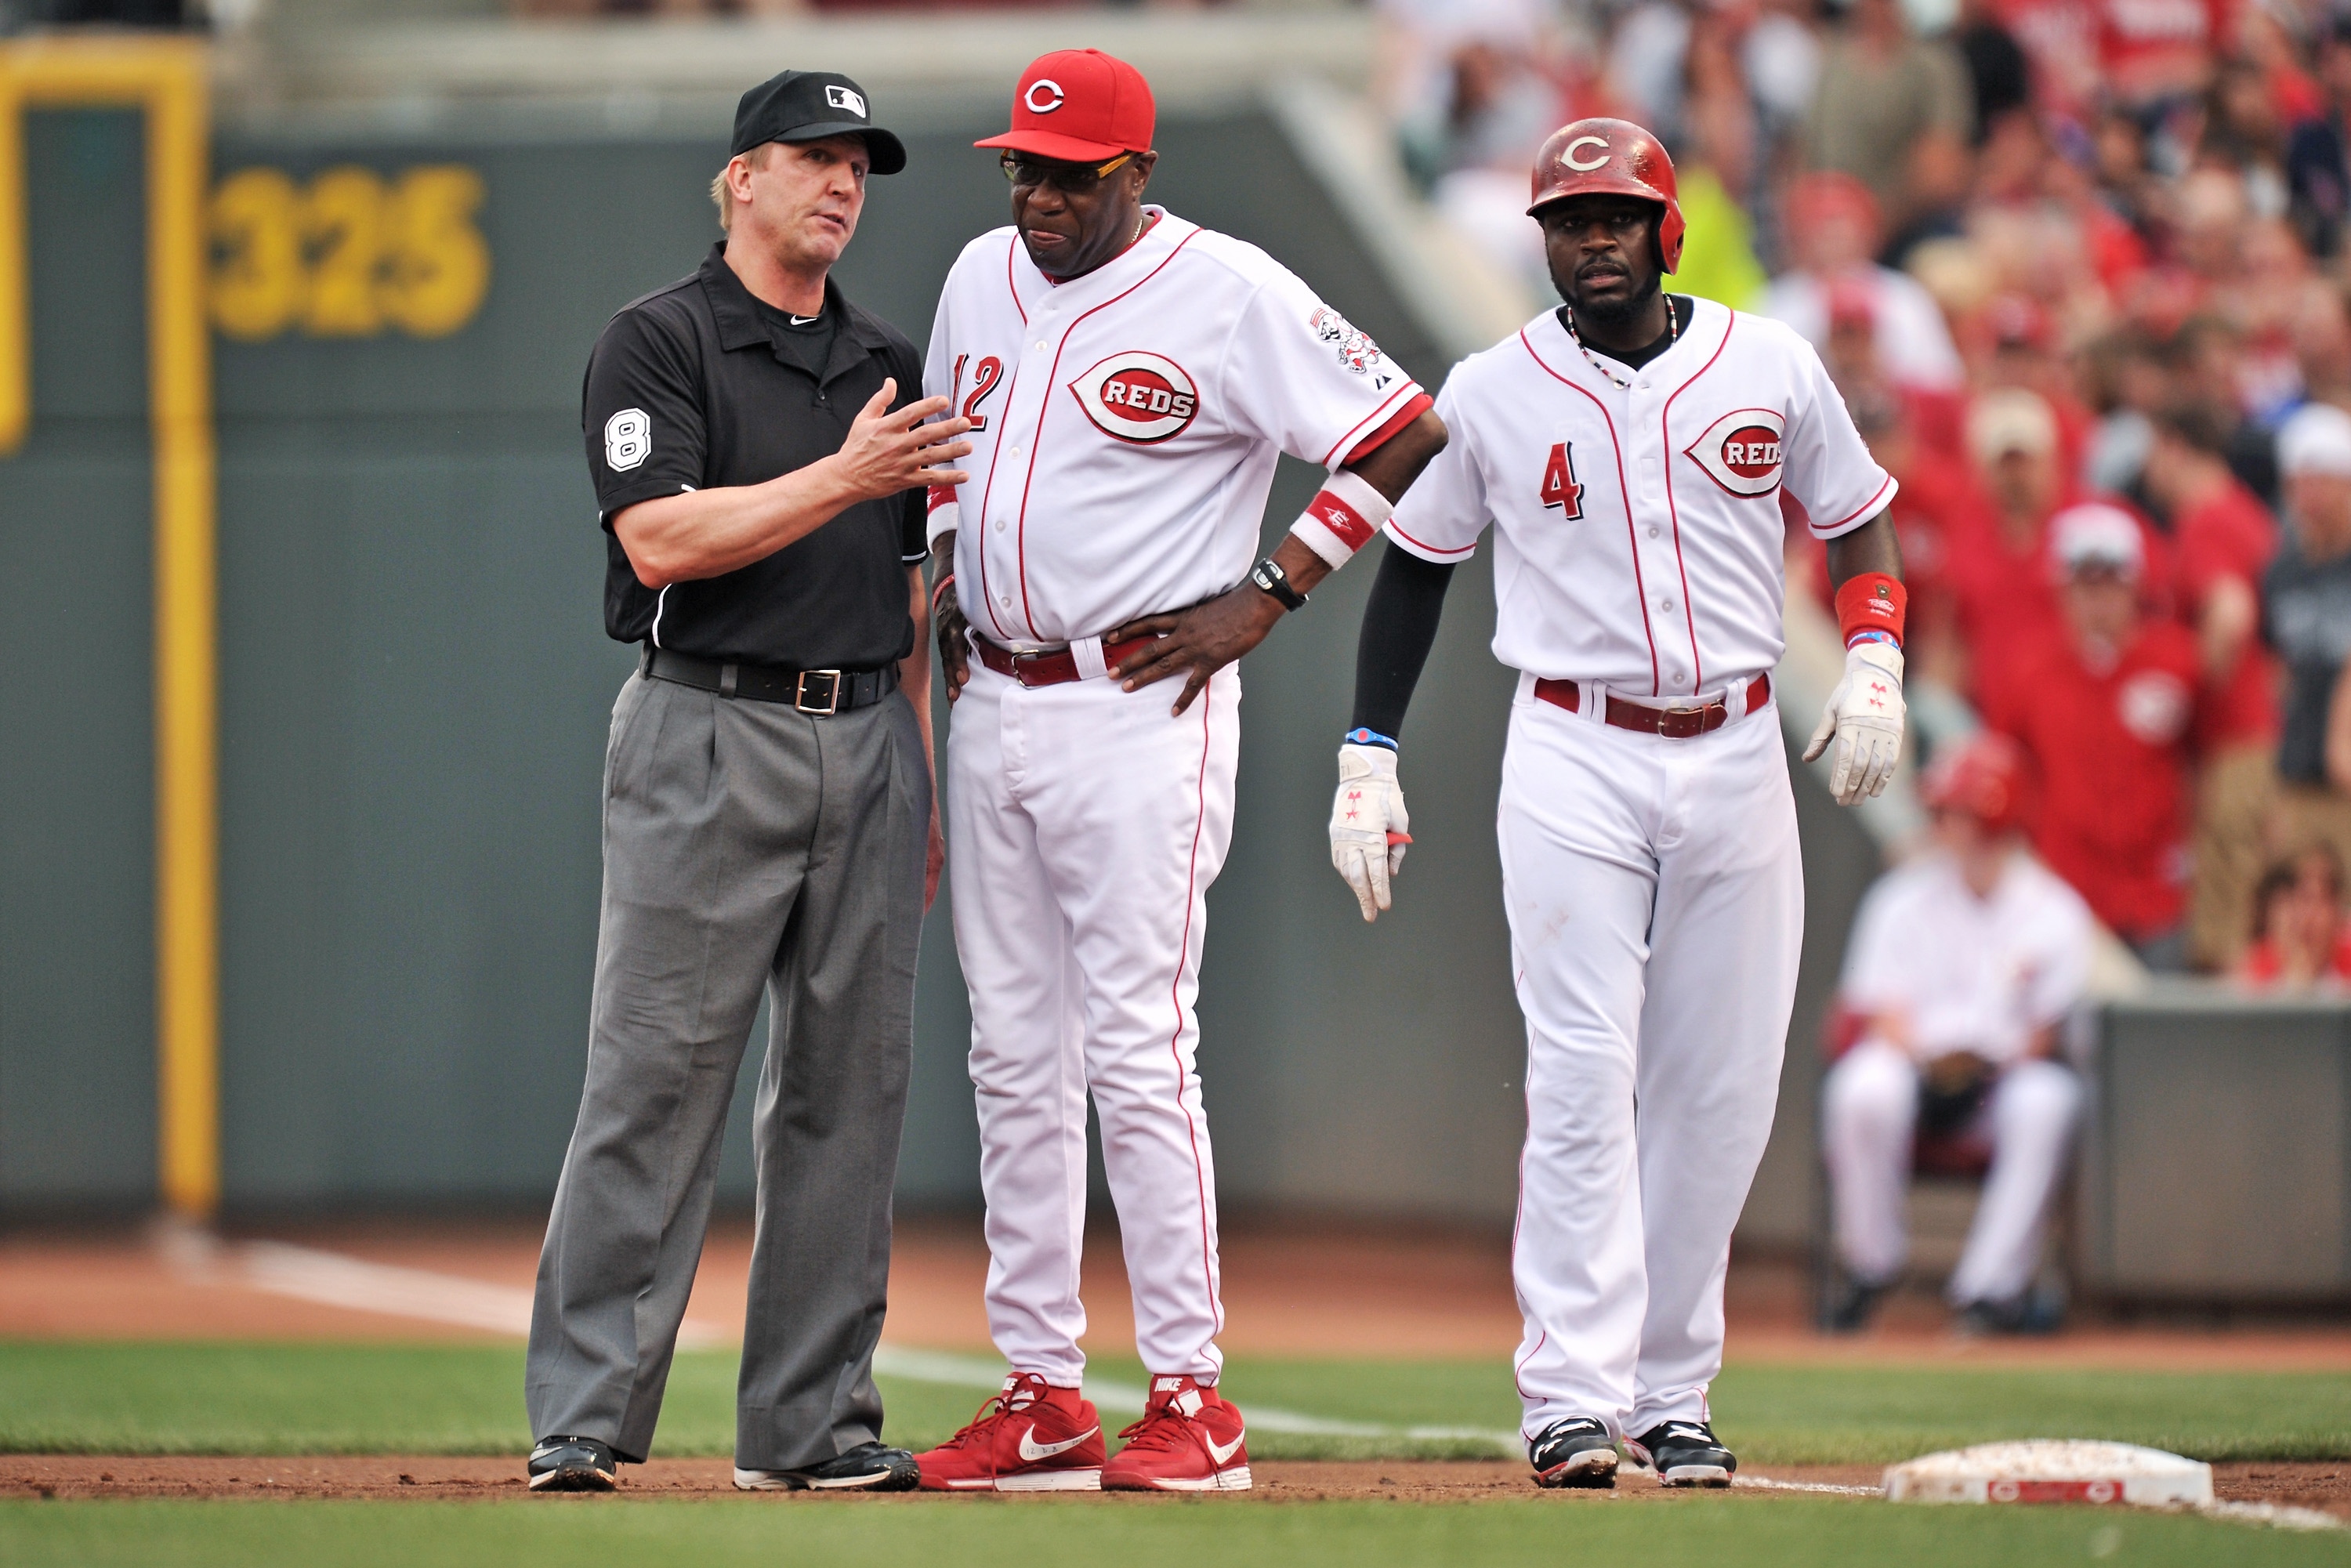 Dusty Baker and Brandon Phillips with the Reds. (Getty Images)